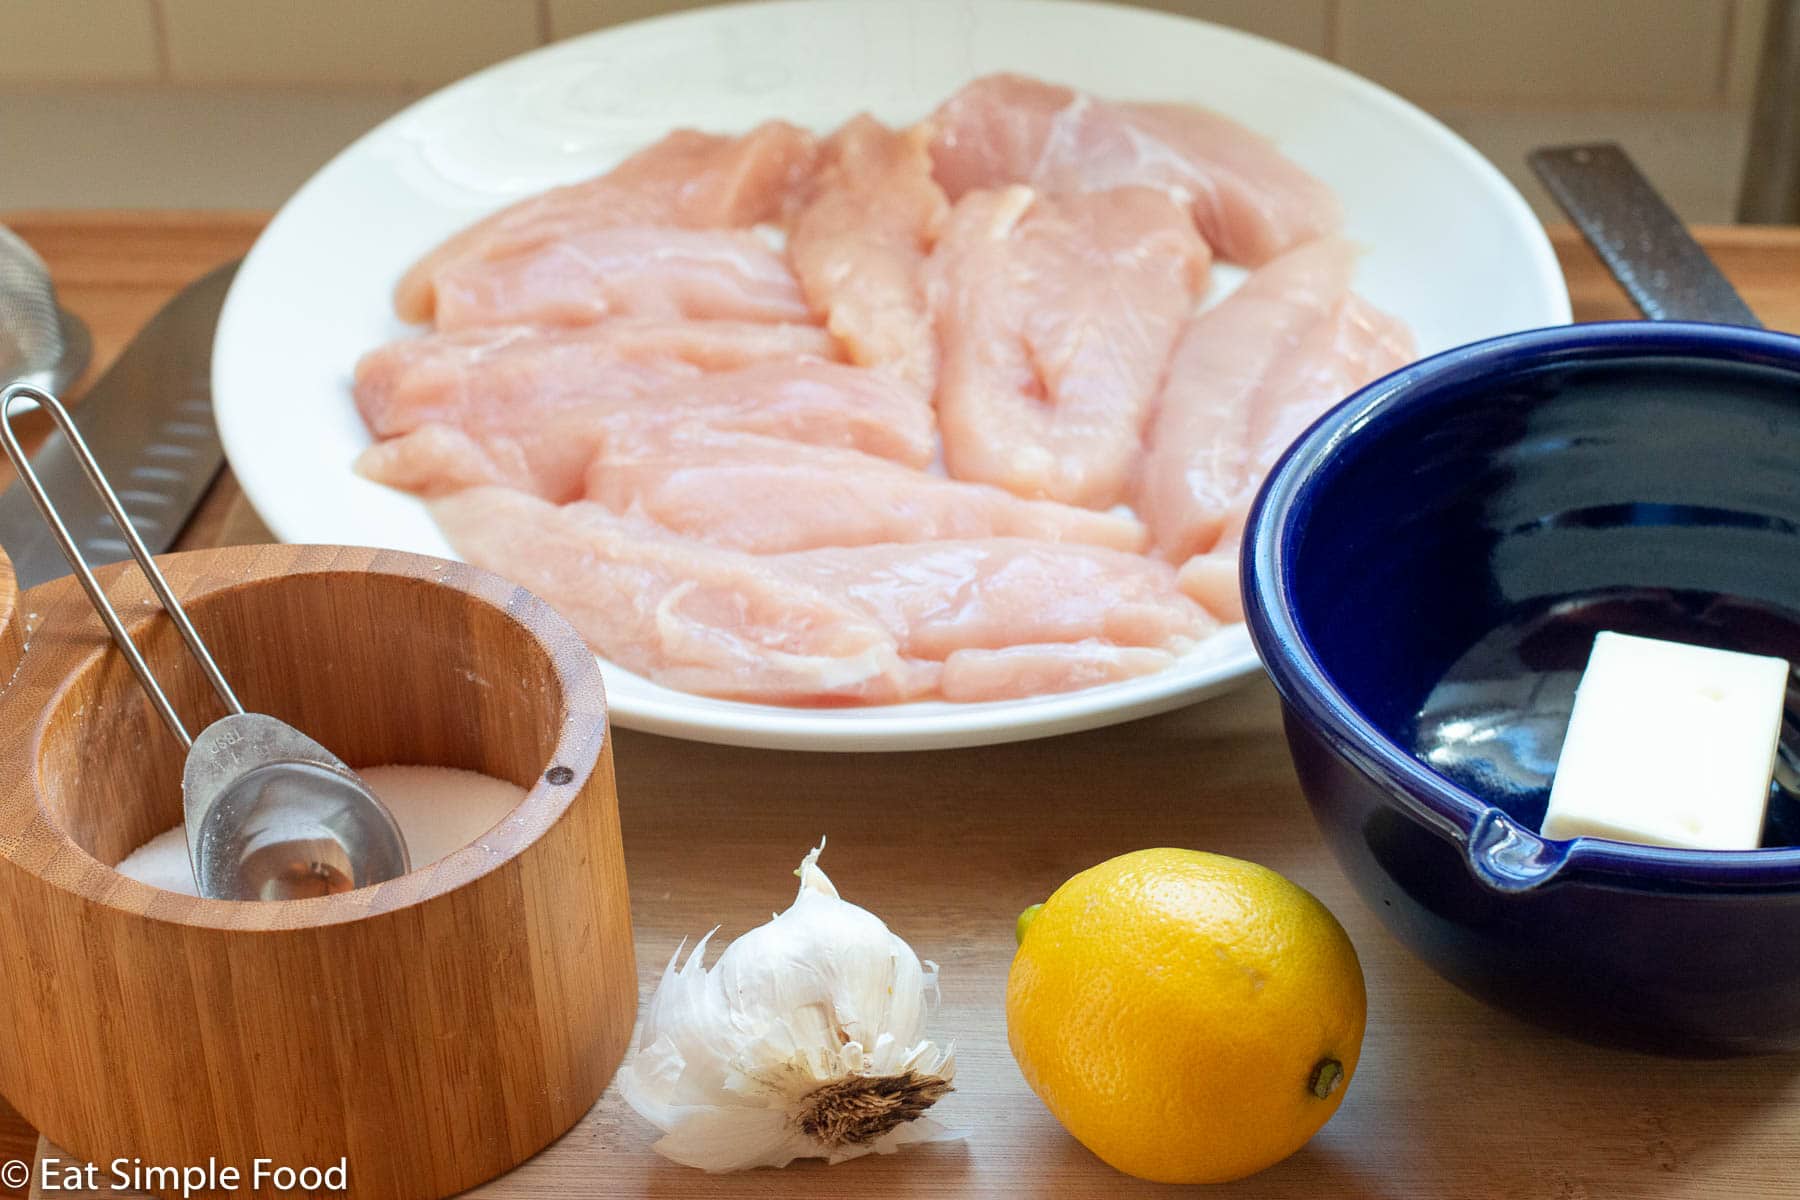 Raw chicken on a white plate and ingredients in front: wood bowl of salt, whole lemon, whole garlic, blue bowl of stick of butter.